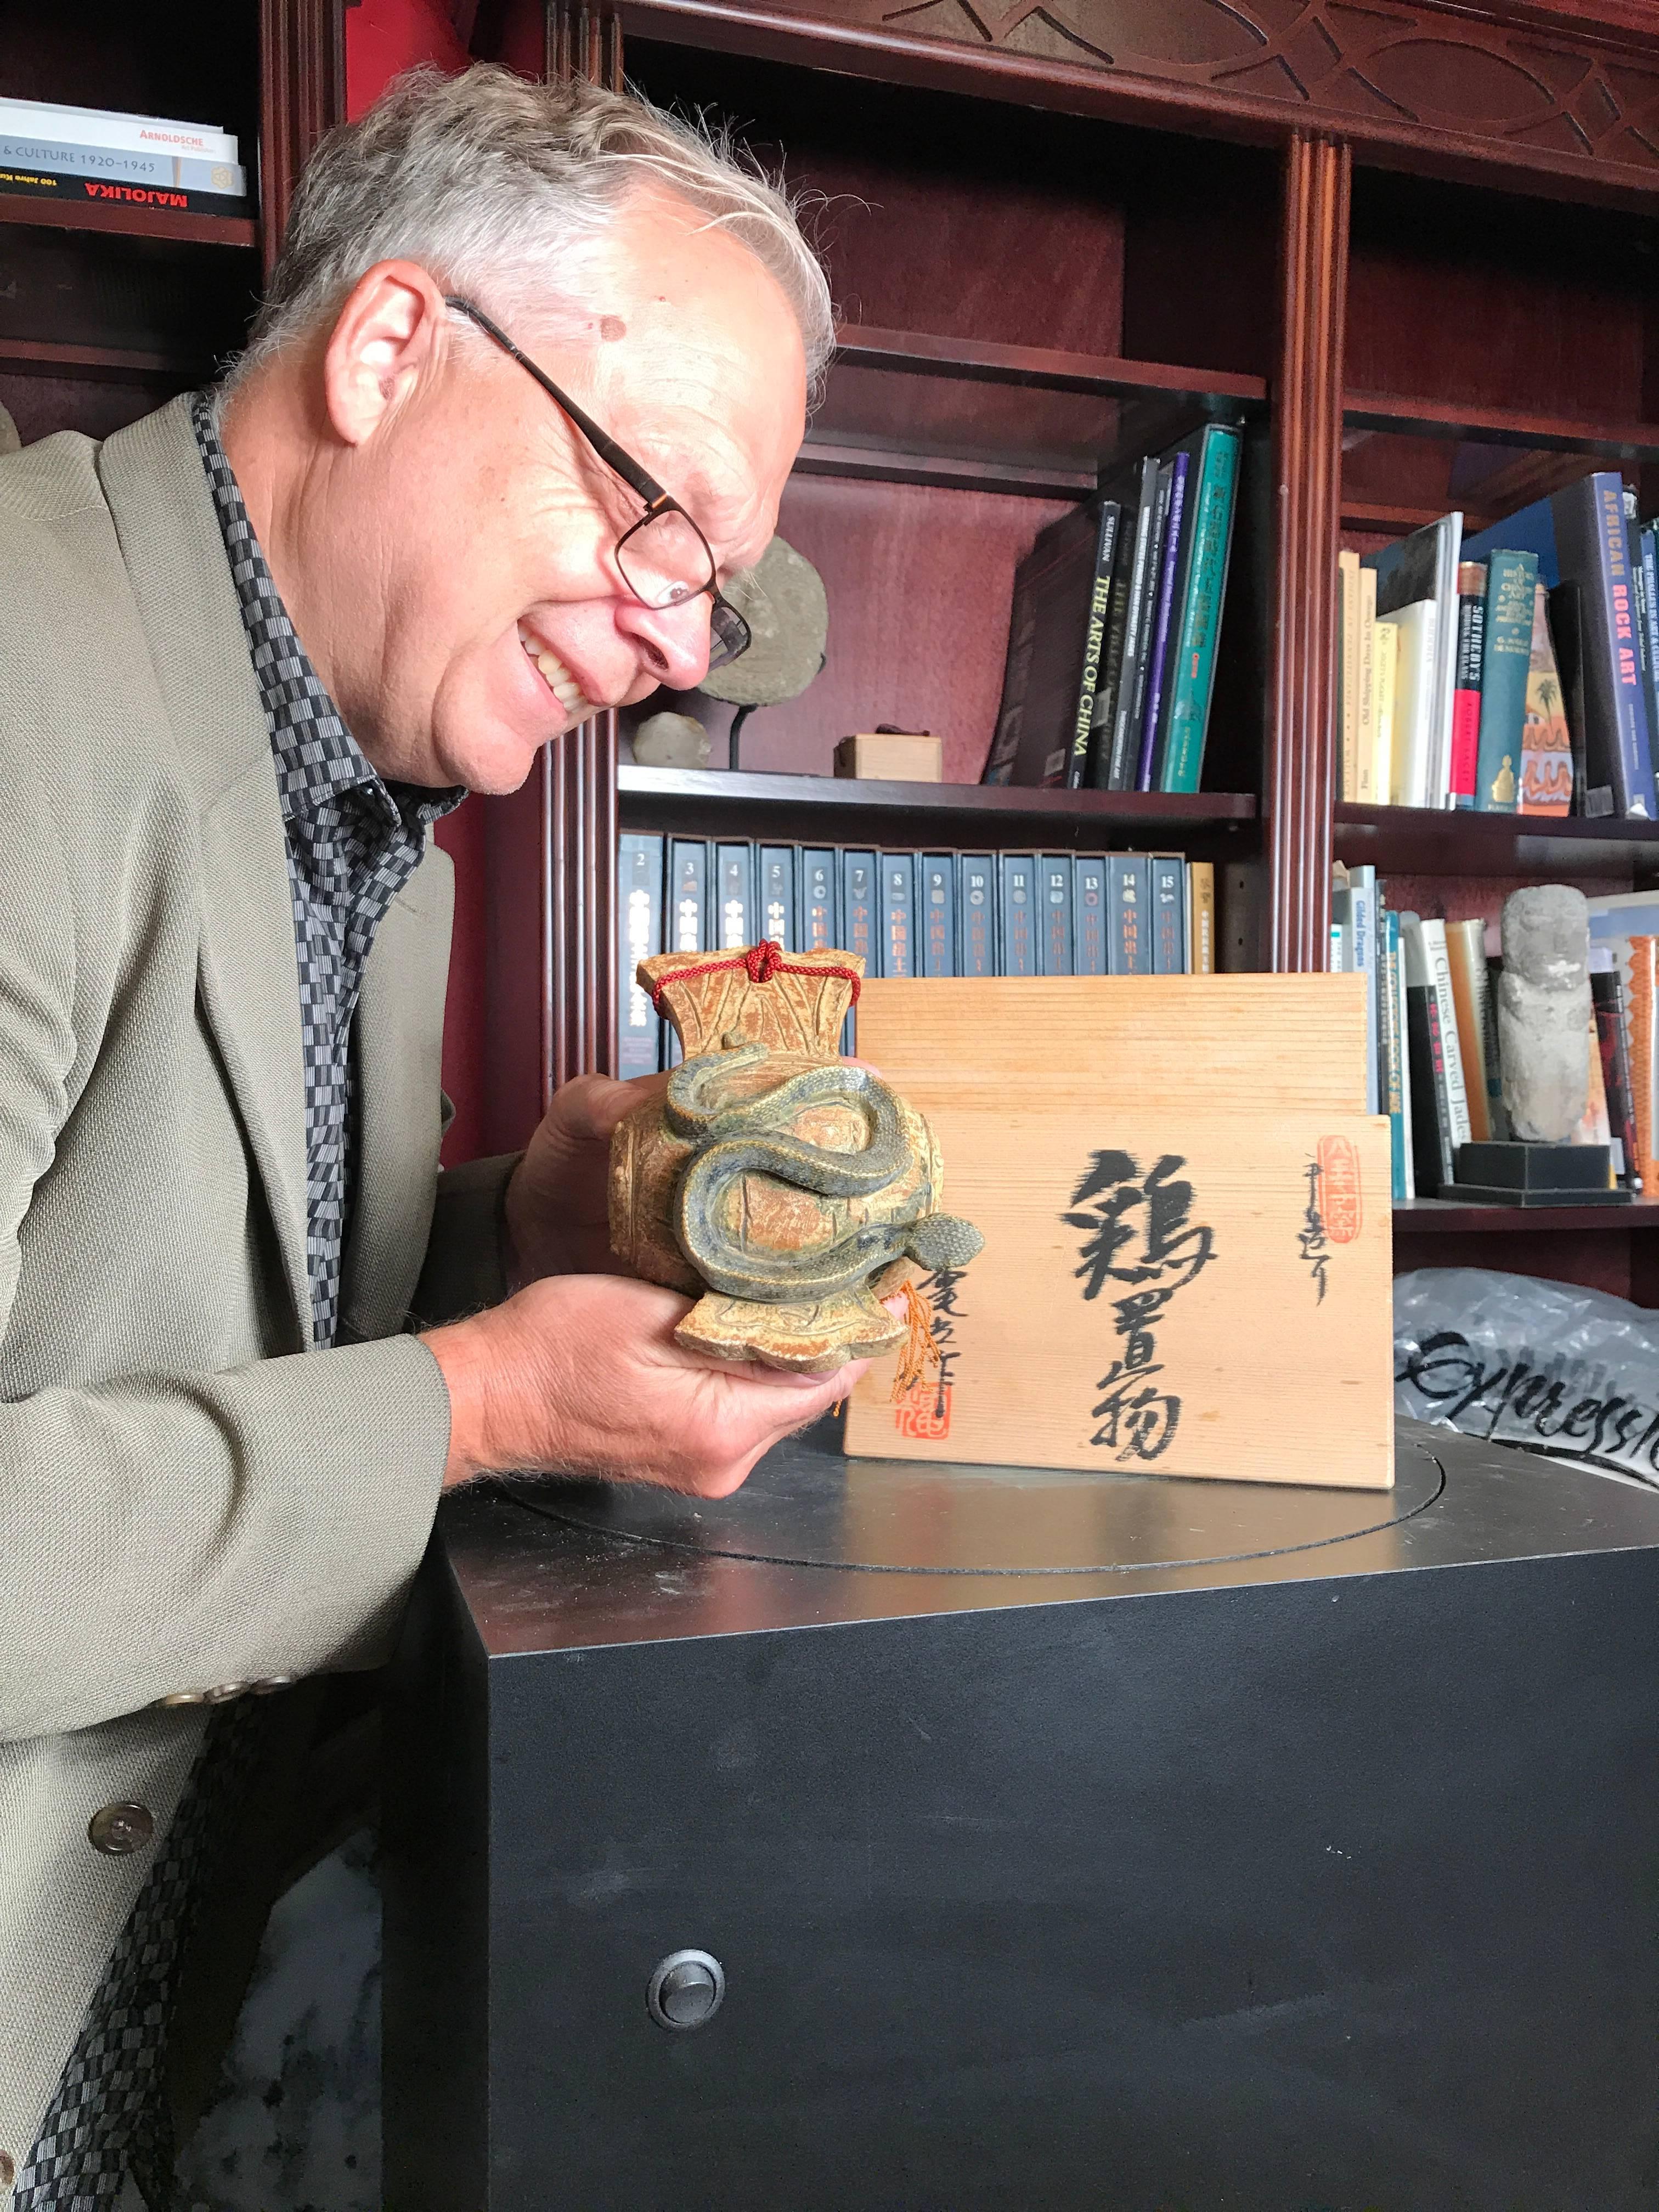 Mint, Signed and boxed

Japan, a fine handmade and hand-painted Snake Zodiac on drum ceramic sculpture- an unusual motif on Japanese ceramics.

The ceramic animal has finely detailed ears, eyes, mouth, coiled back, legs, and hand-painted in